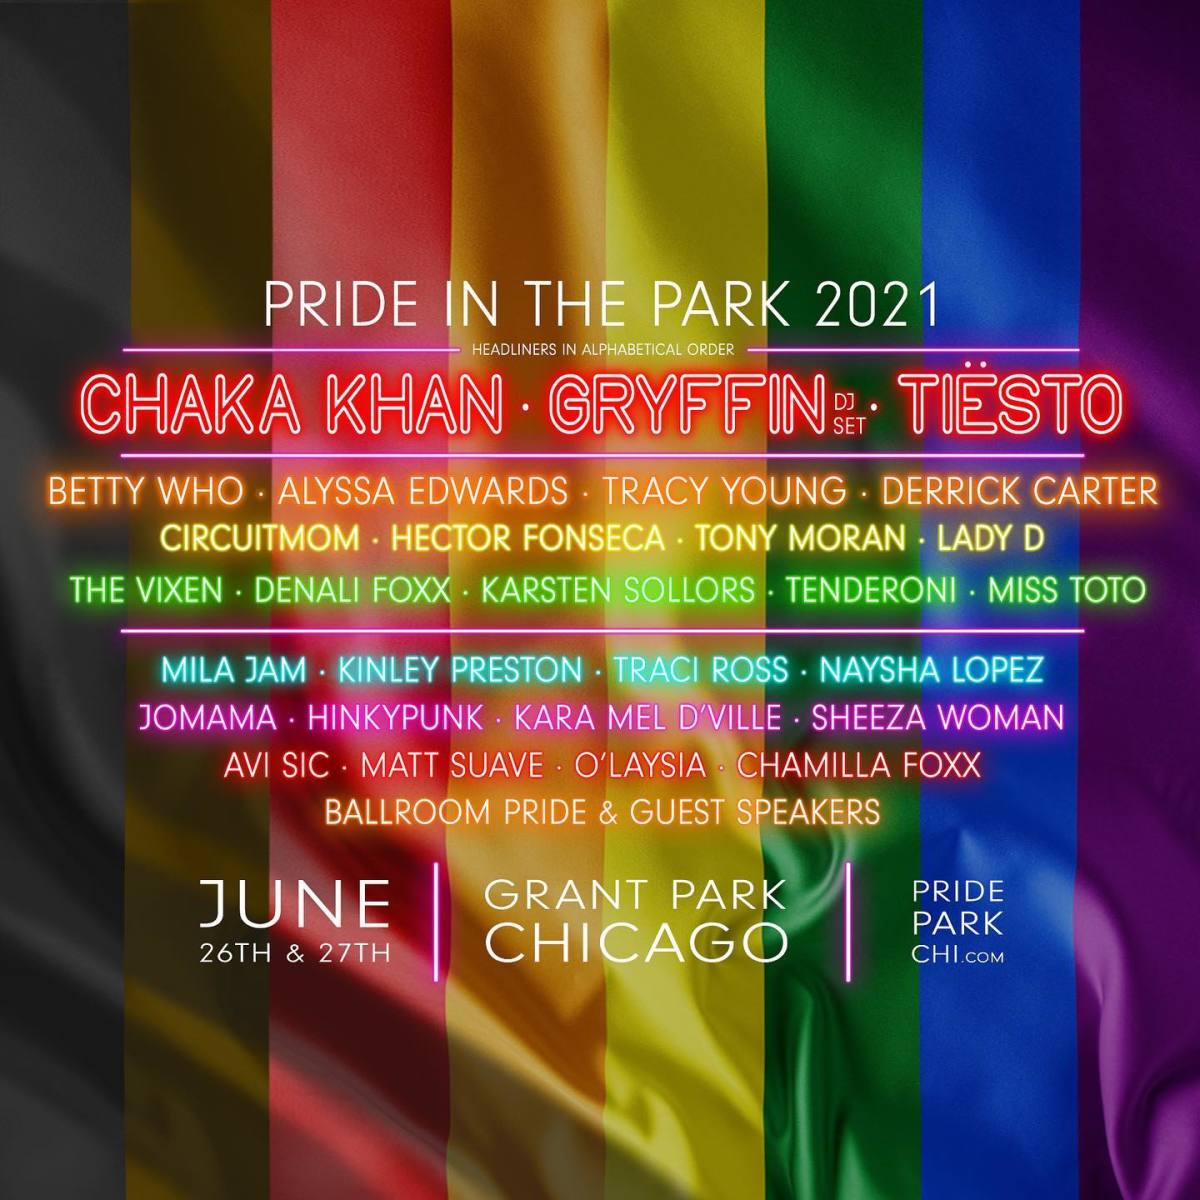 Flyer for Pride In The Park Chicago's 2021 edition, which features headliners Chaka Khan, Gryffin, and Tiësto.